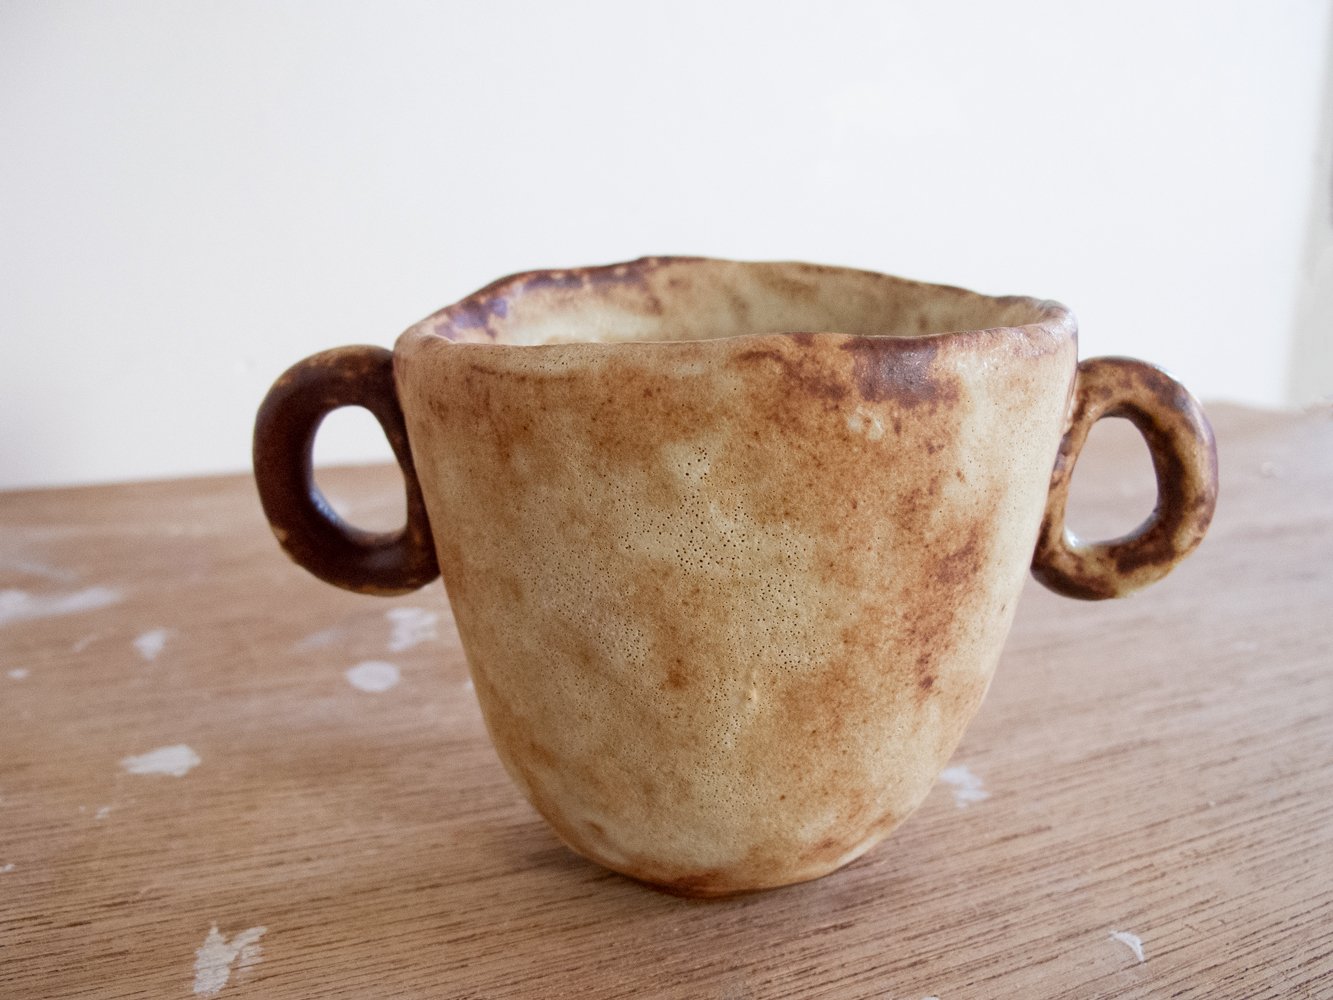 Image of rustic cup